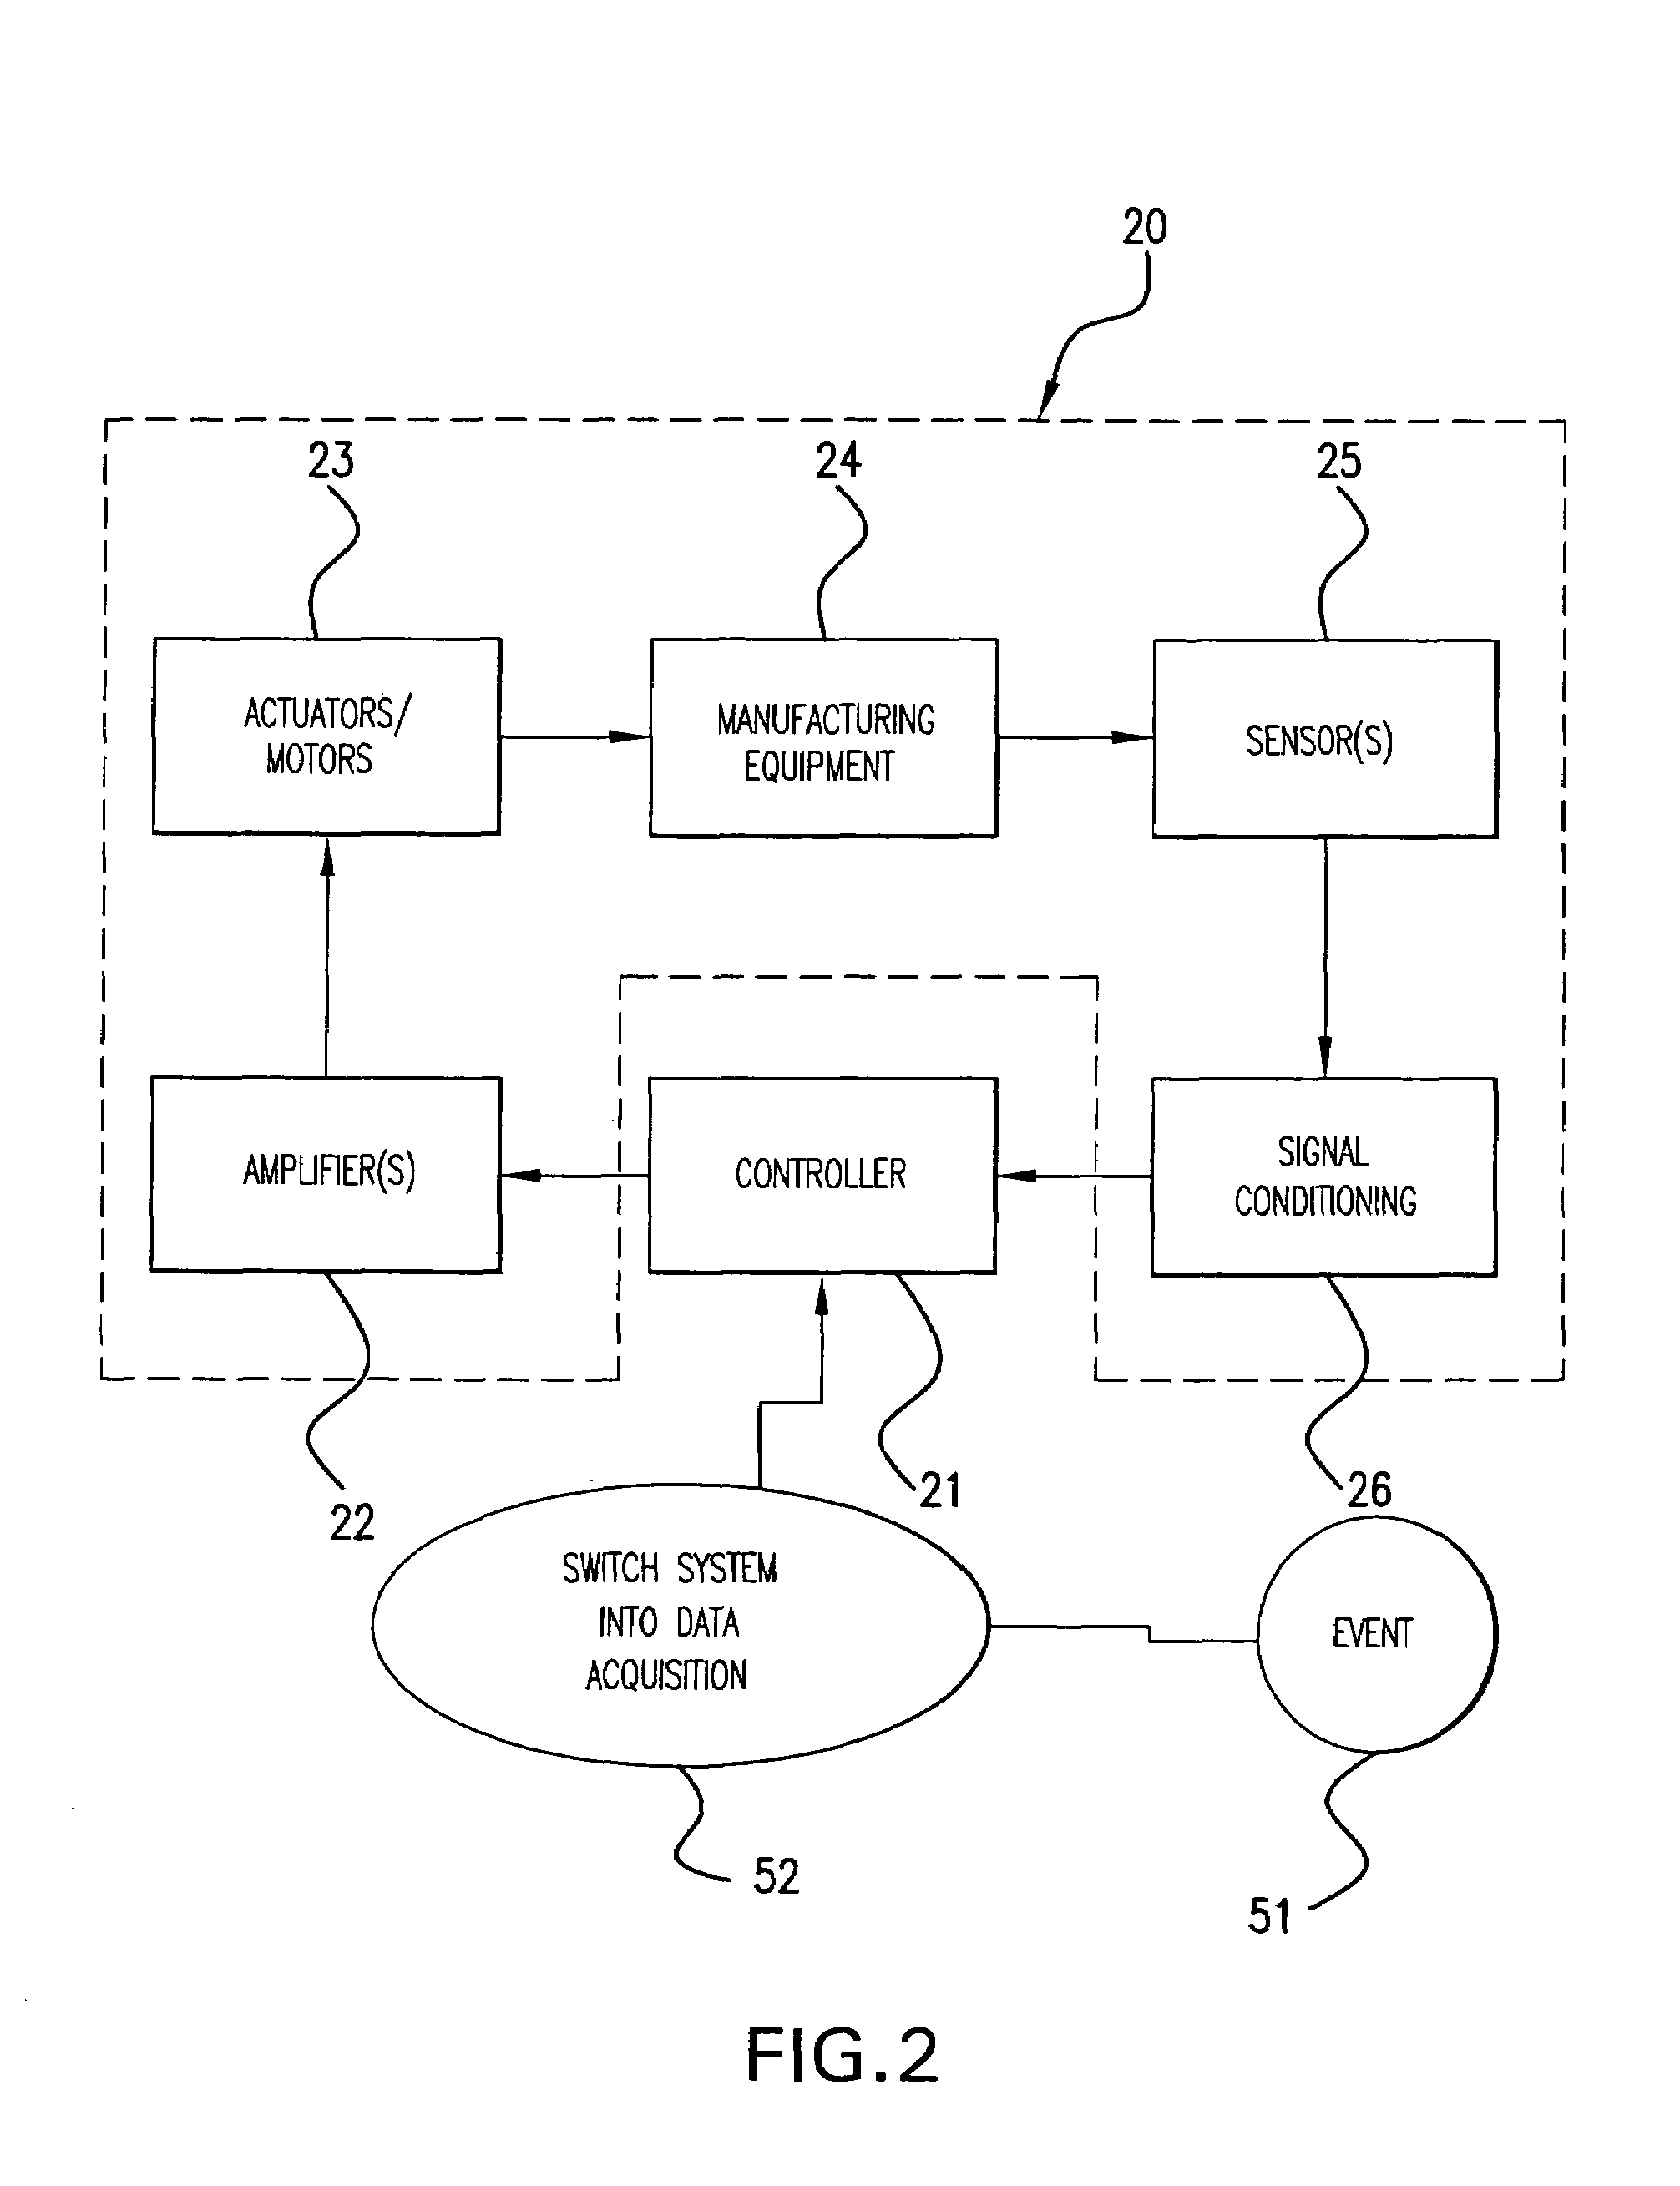 Tuning control parameters of vibration reduction and motion control systems for fabrication equipment and robotic systems